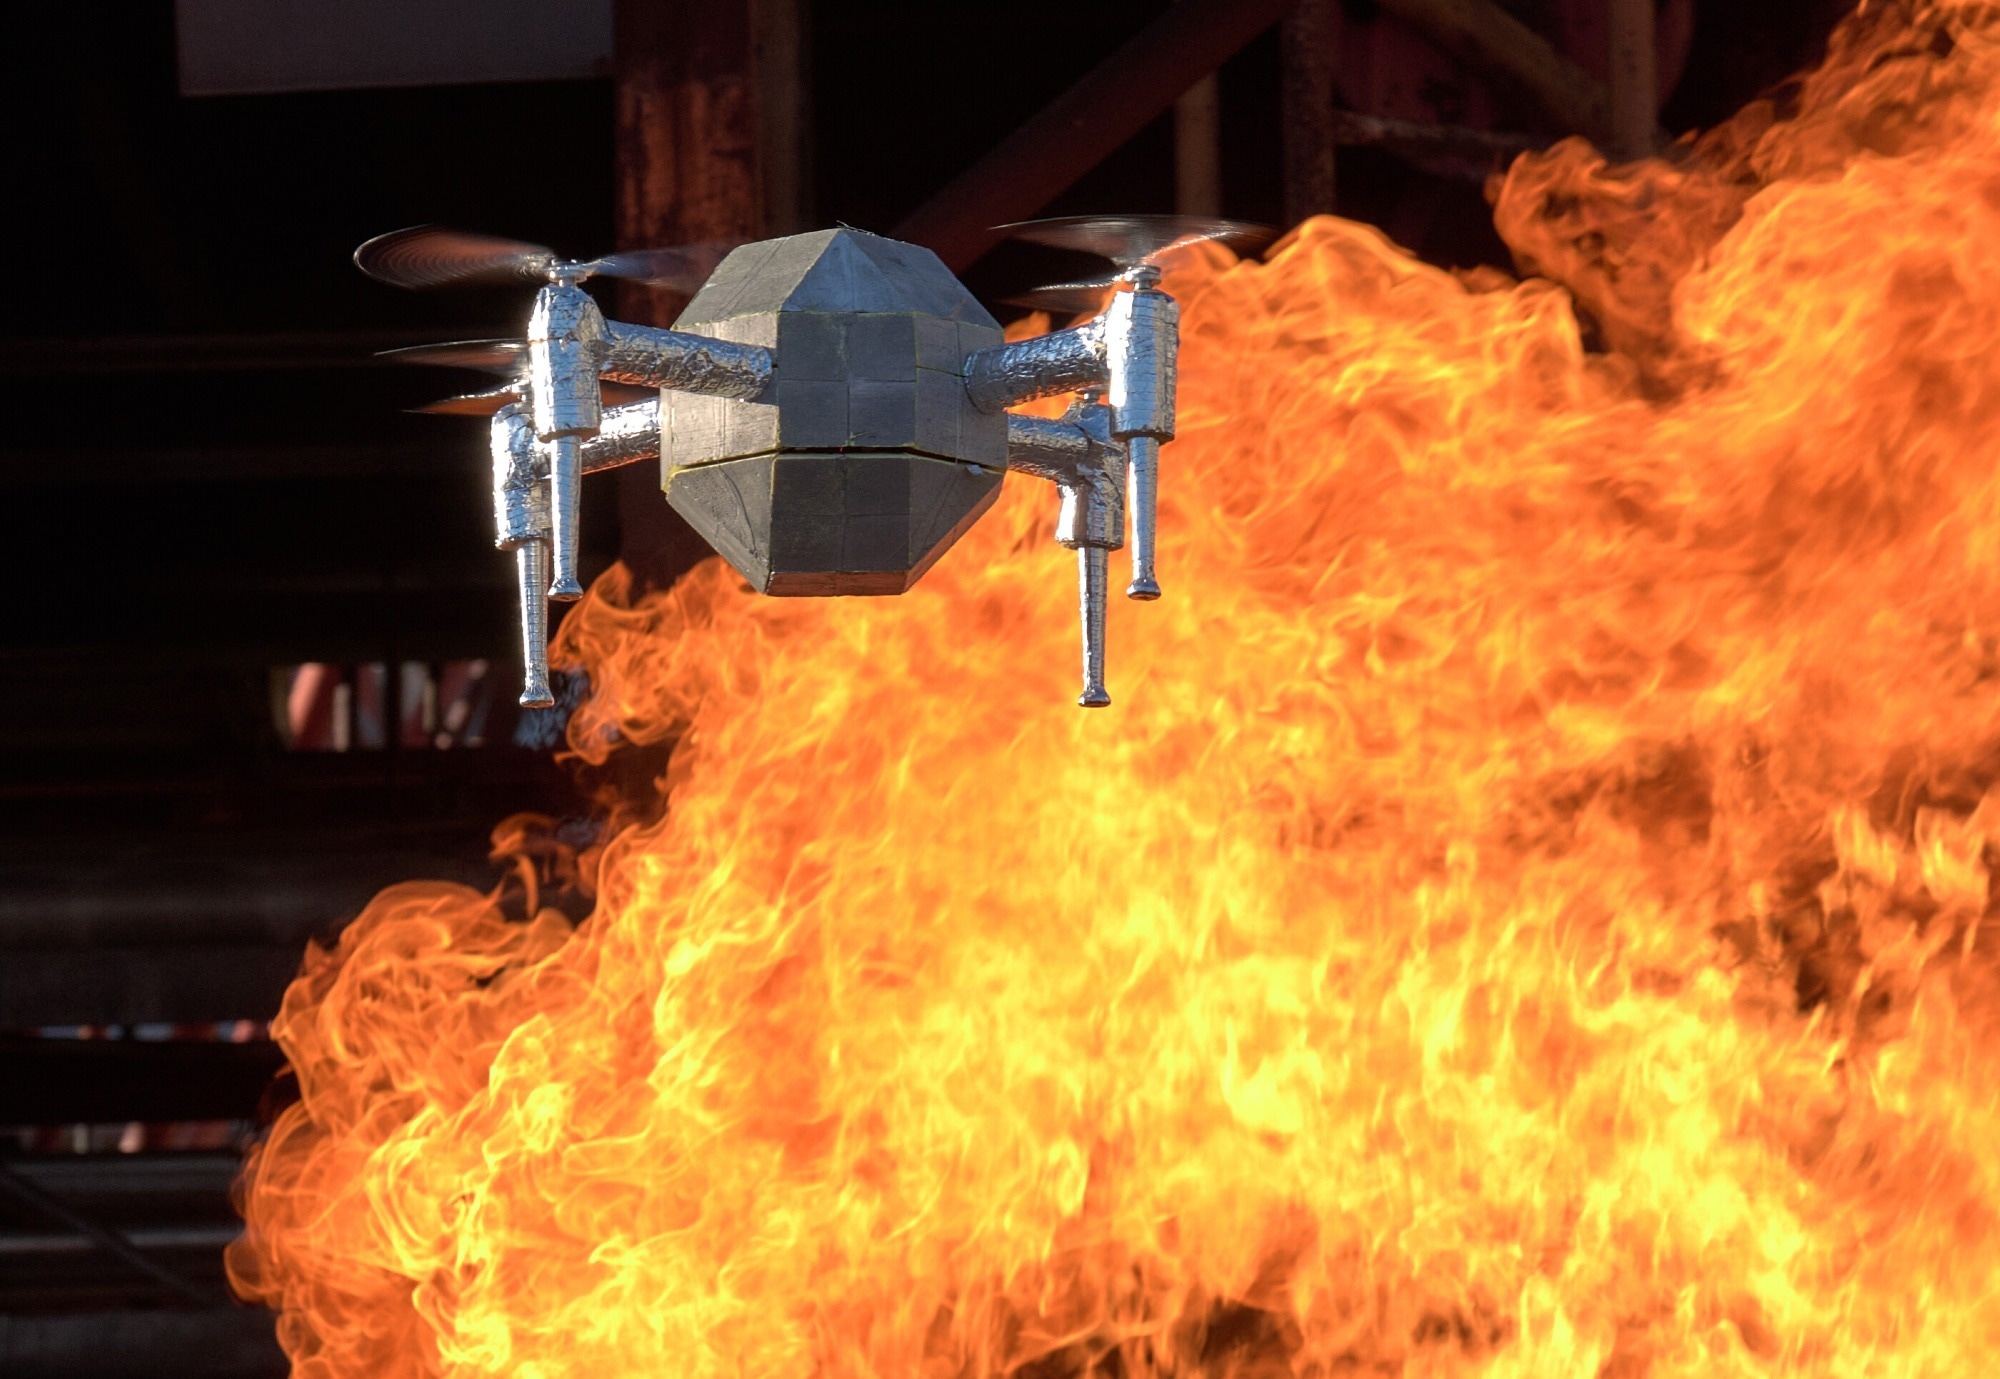 New Drone Designed to Enter Burning Buildings